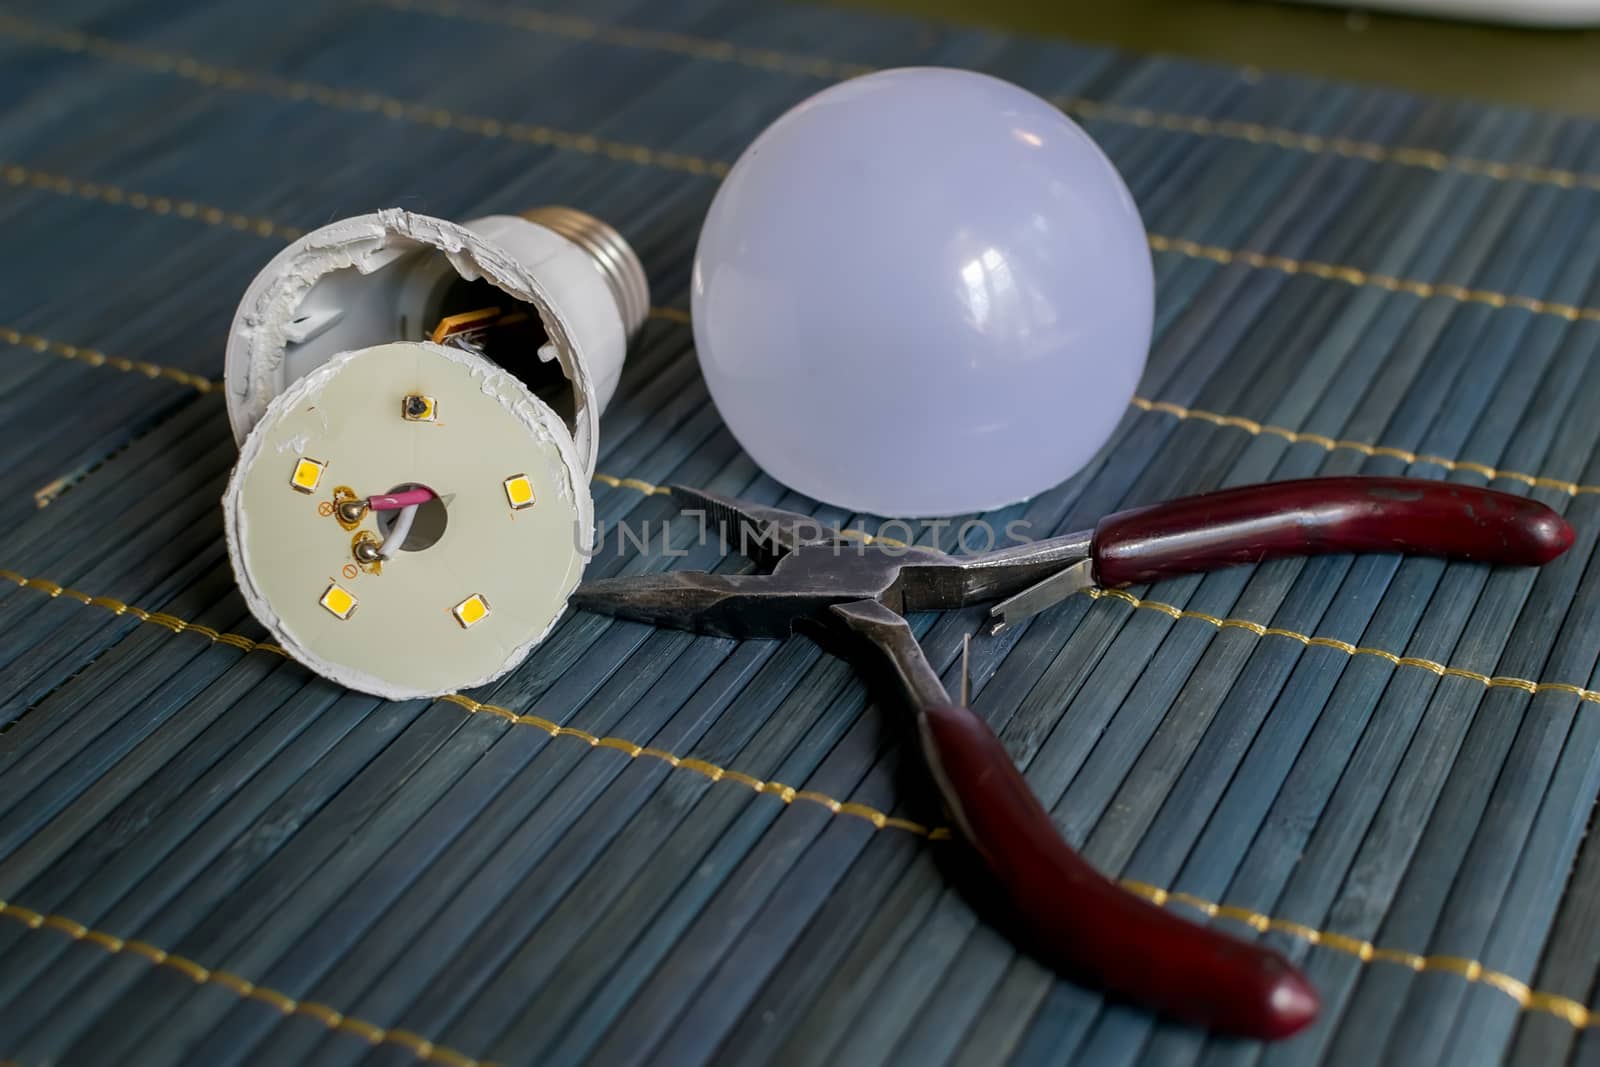 faulty, disassembled led household lamp by jk3030